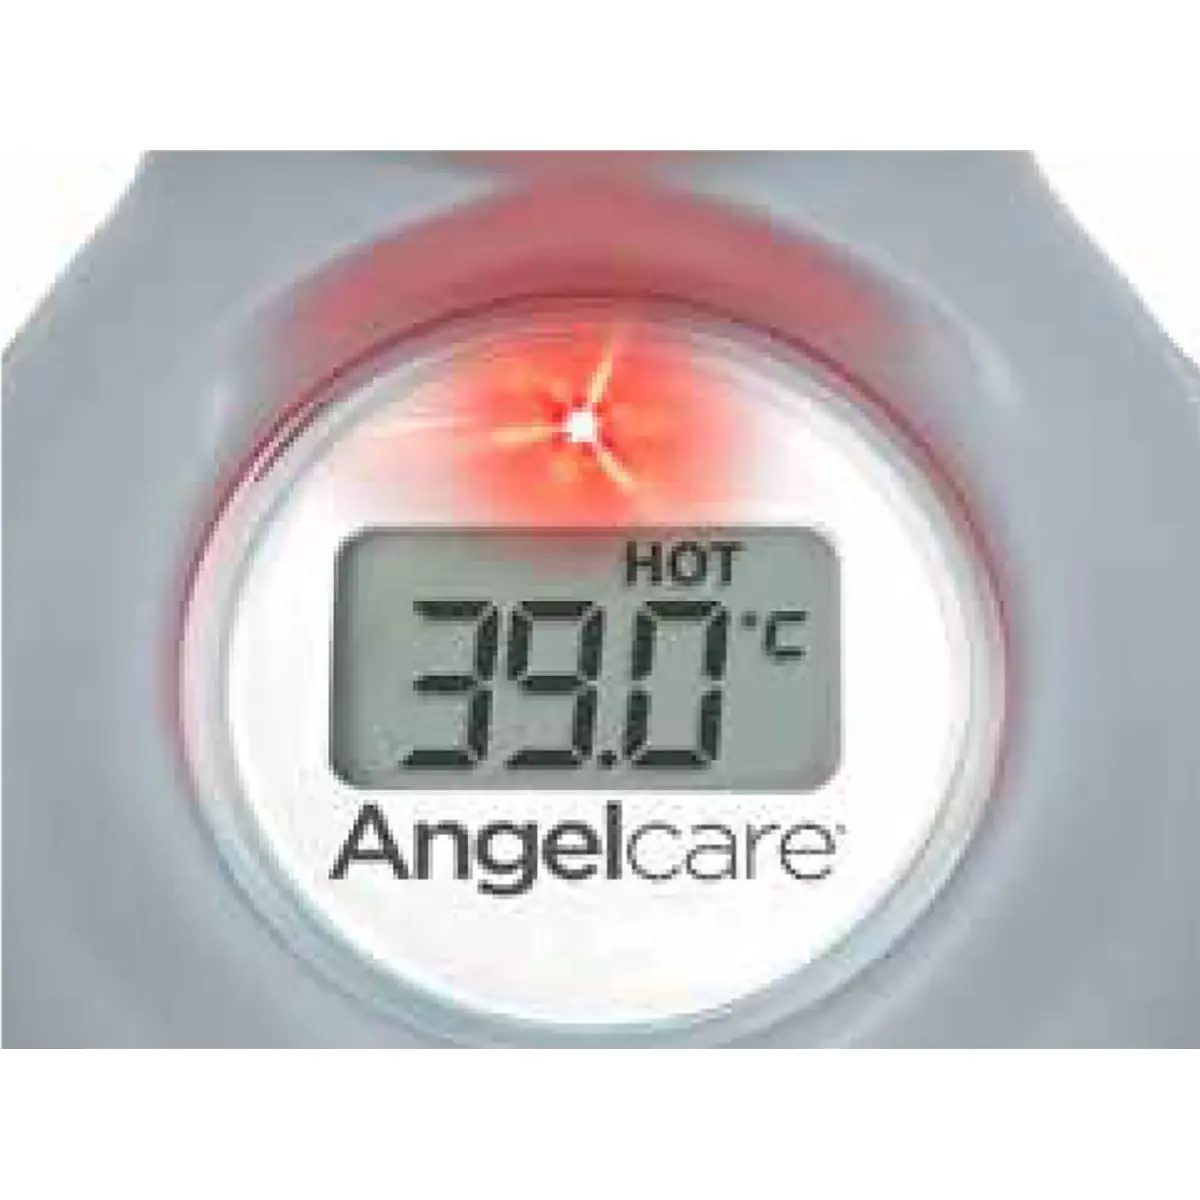 Angelcare Baby Bath and Room Thermometer